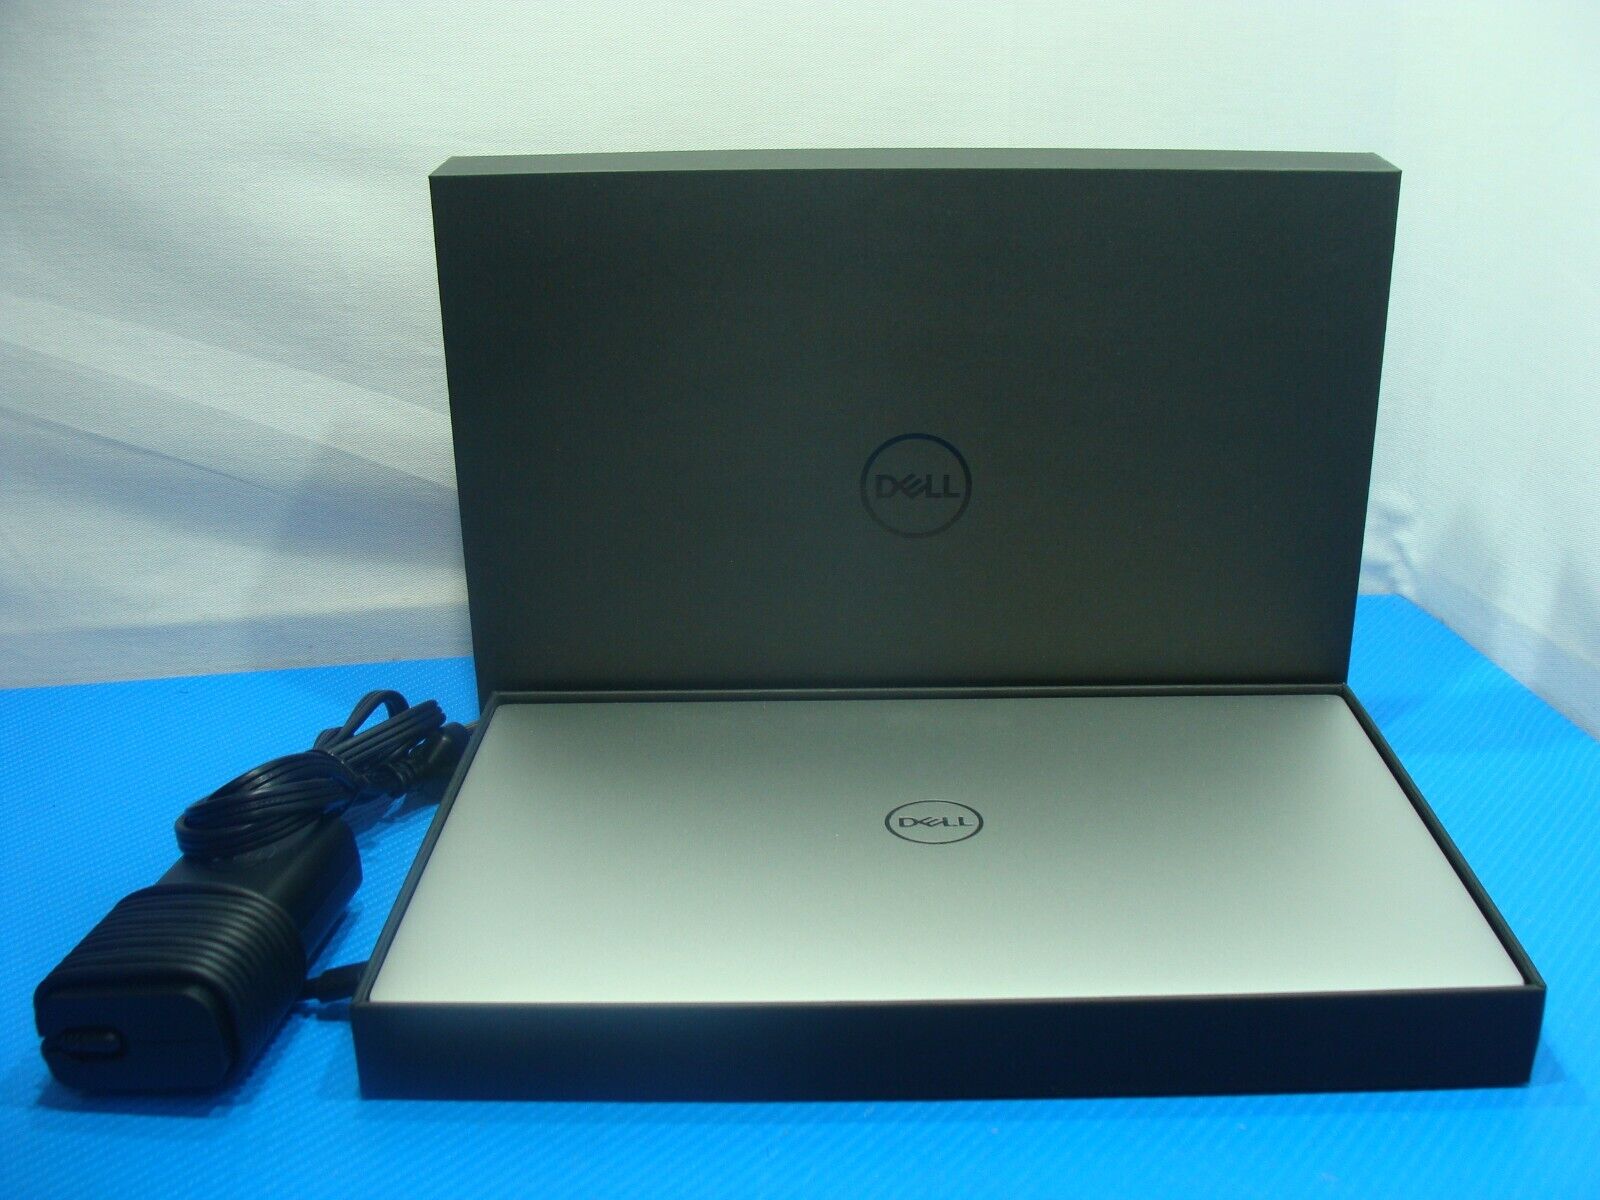 PwR Battery Dell XPS 13 9305 Intel i7-1165G7 2.8Ghz 16GB 1TB SSD TOUCH 13.3